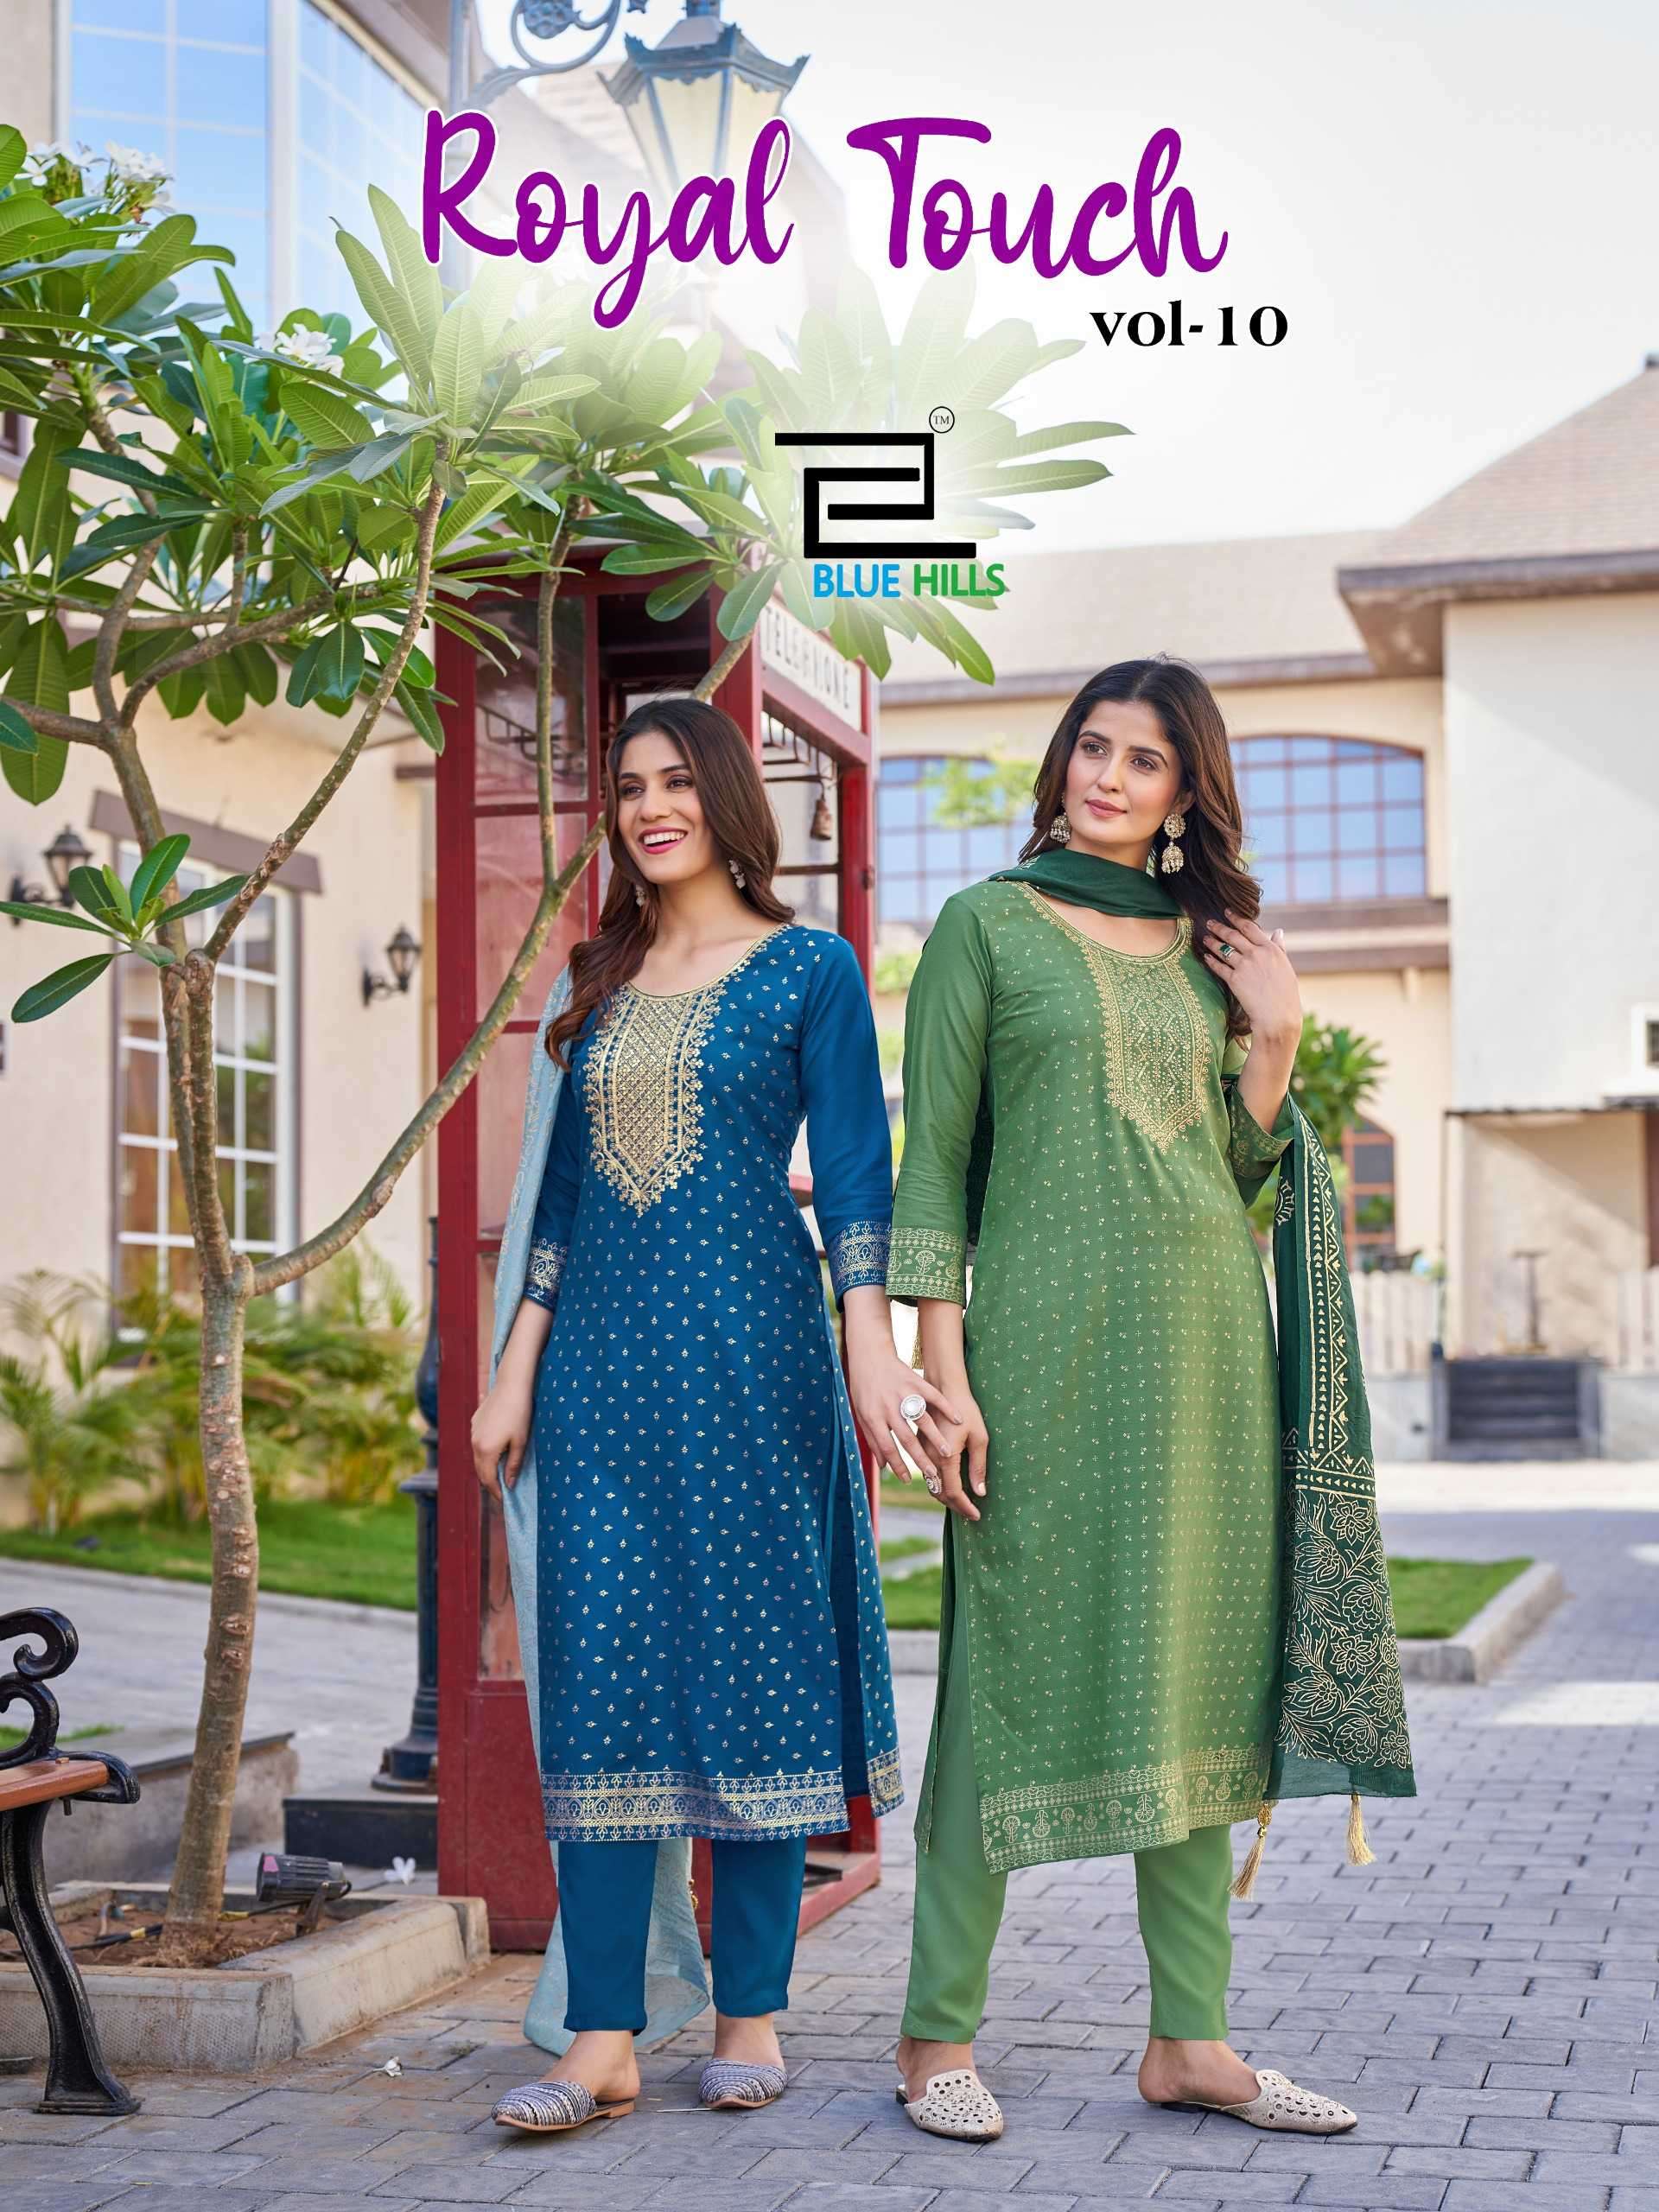 Blue hills presents Royal touch vol-10 Rayon designer kurtis with pant and dupatta collection 